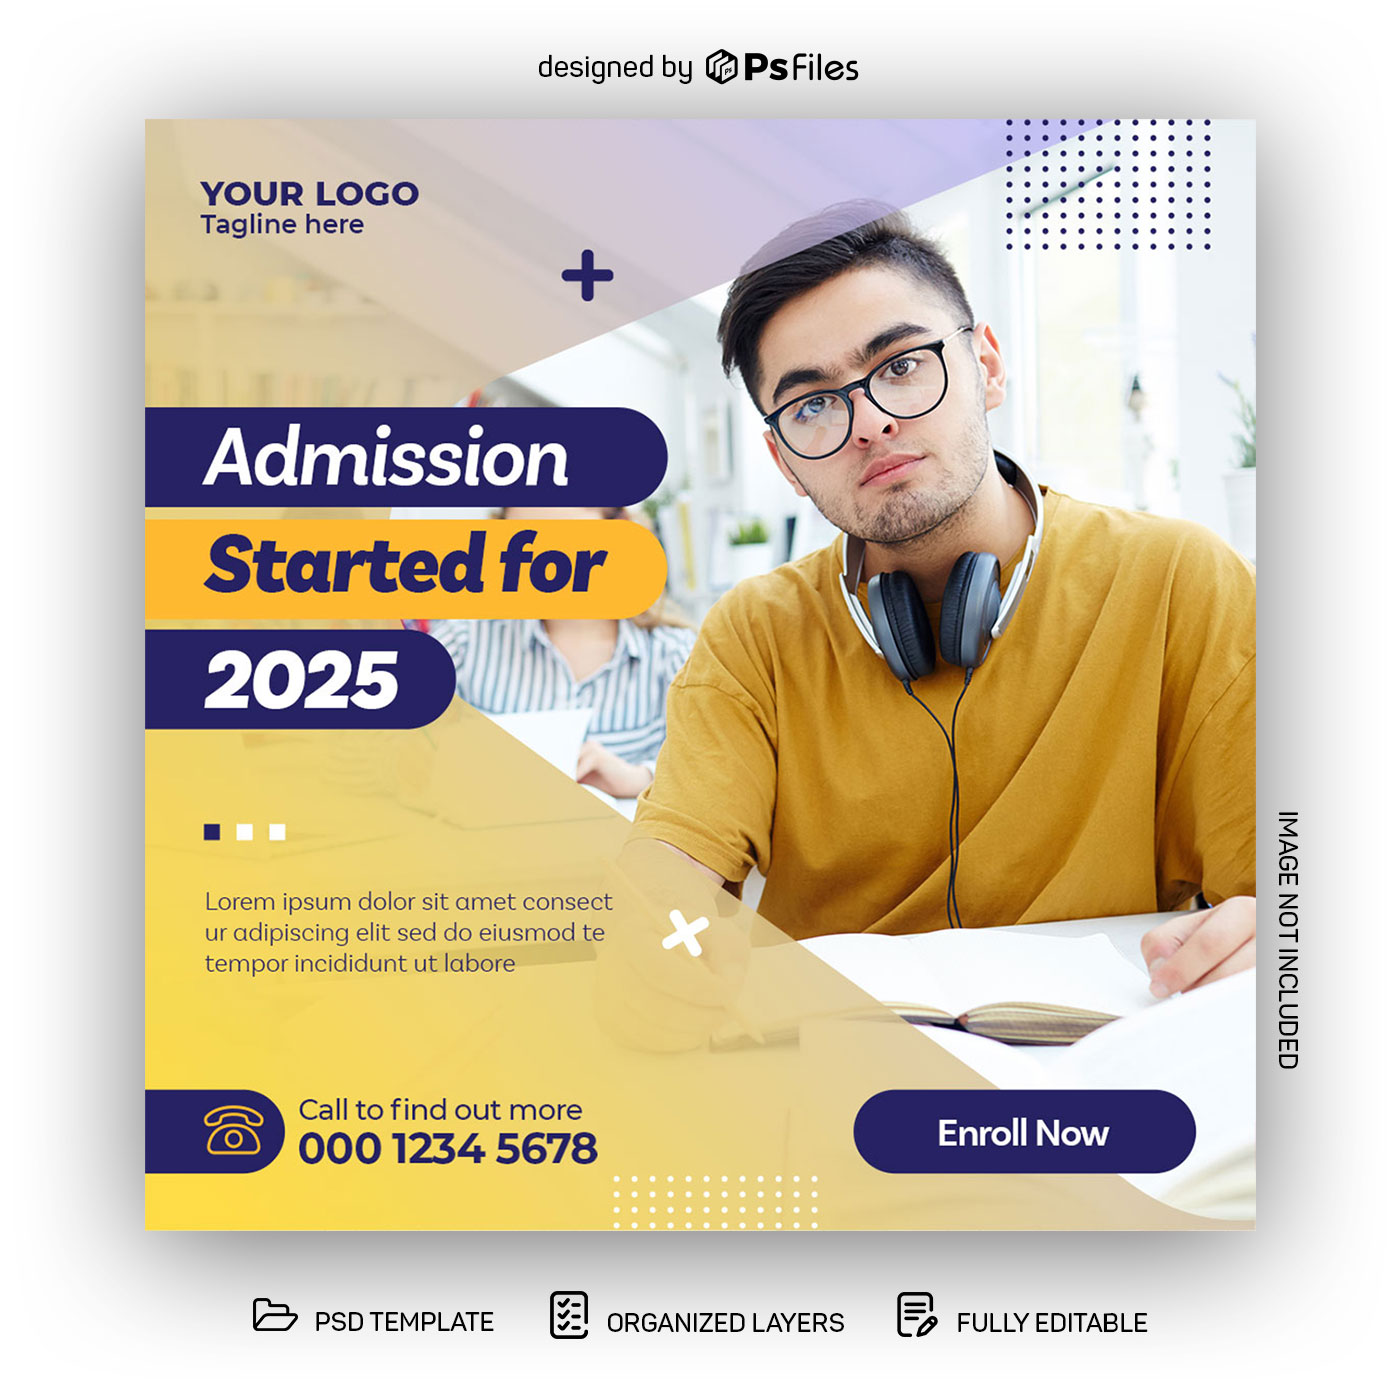 PsFiles Free Instagram Post Design PSD Template for Admission Started